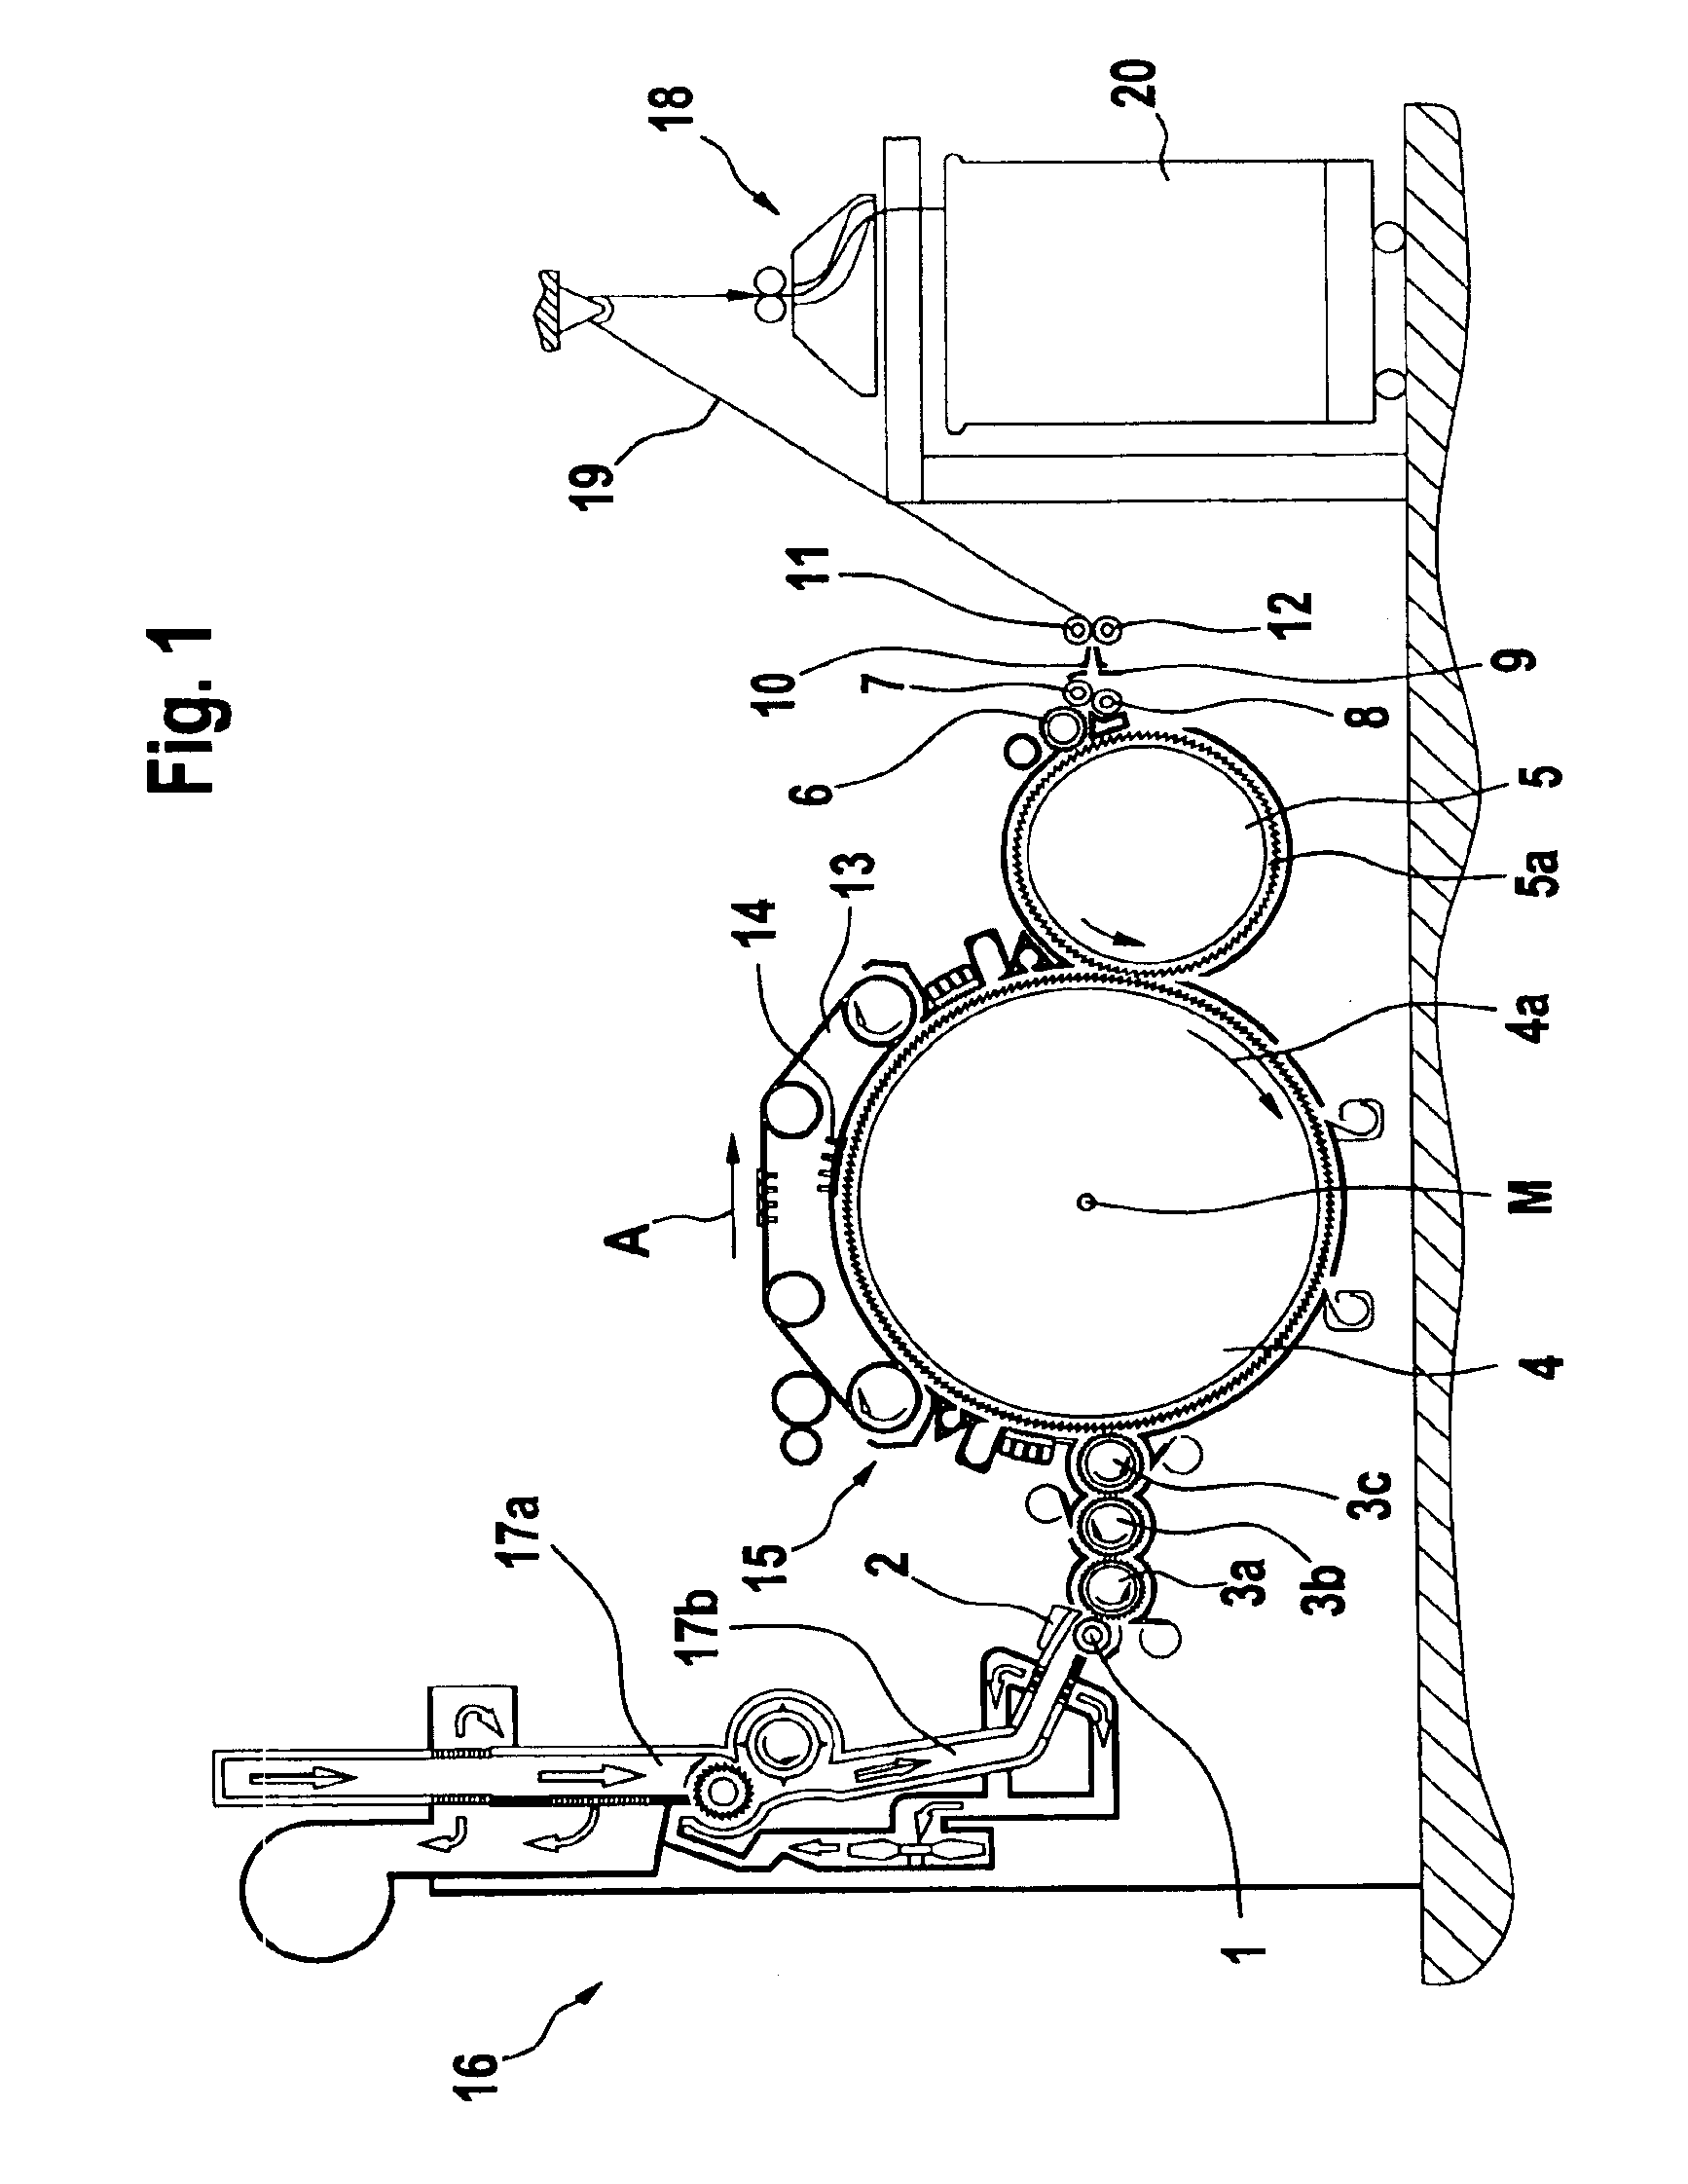 Apparatus for determining fibre lengths and fibre length distribution from a fibre material sample, especially in spinning preparation